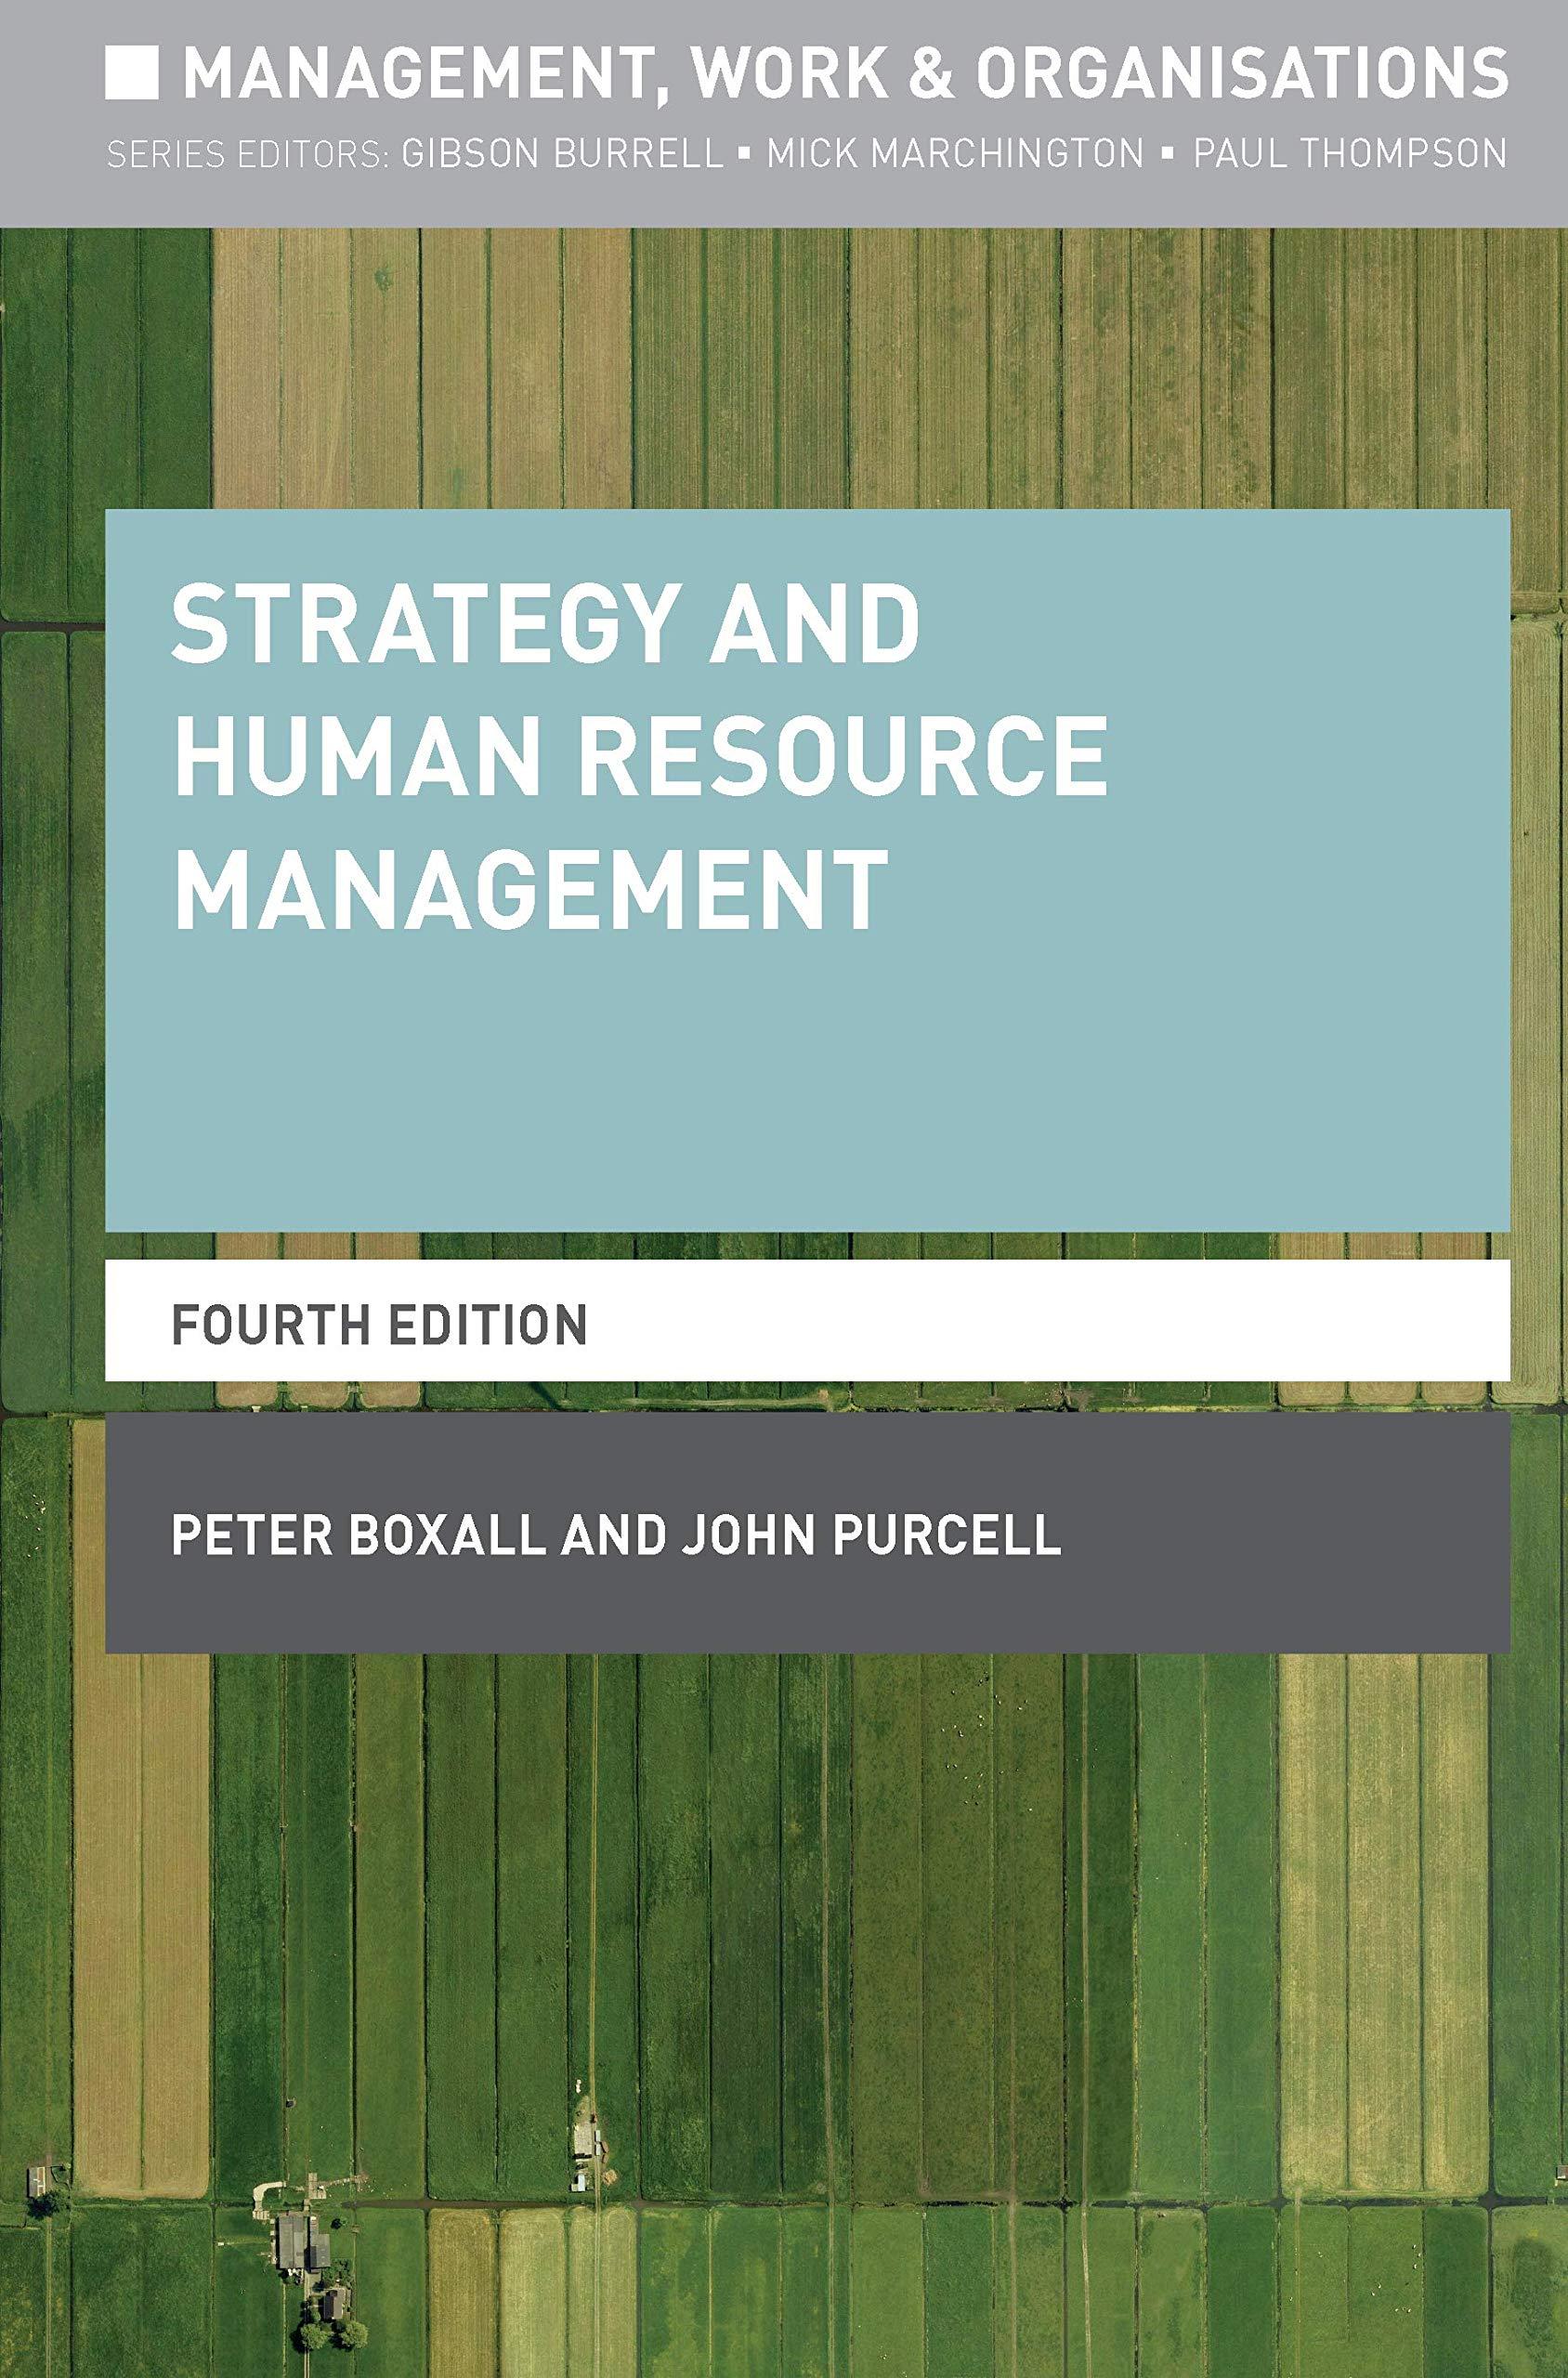 strategy and human resource management 4th edition john purcell, peter boxall 1137407638, 978-1137407634